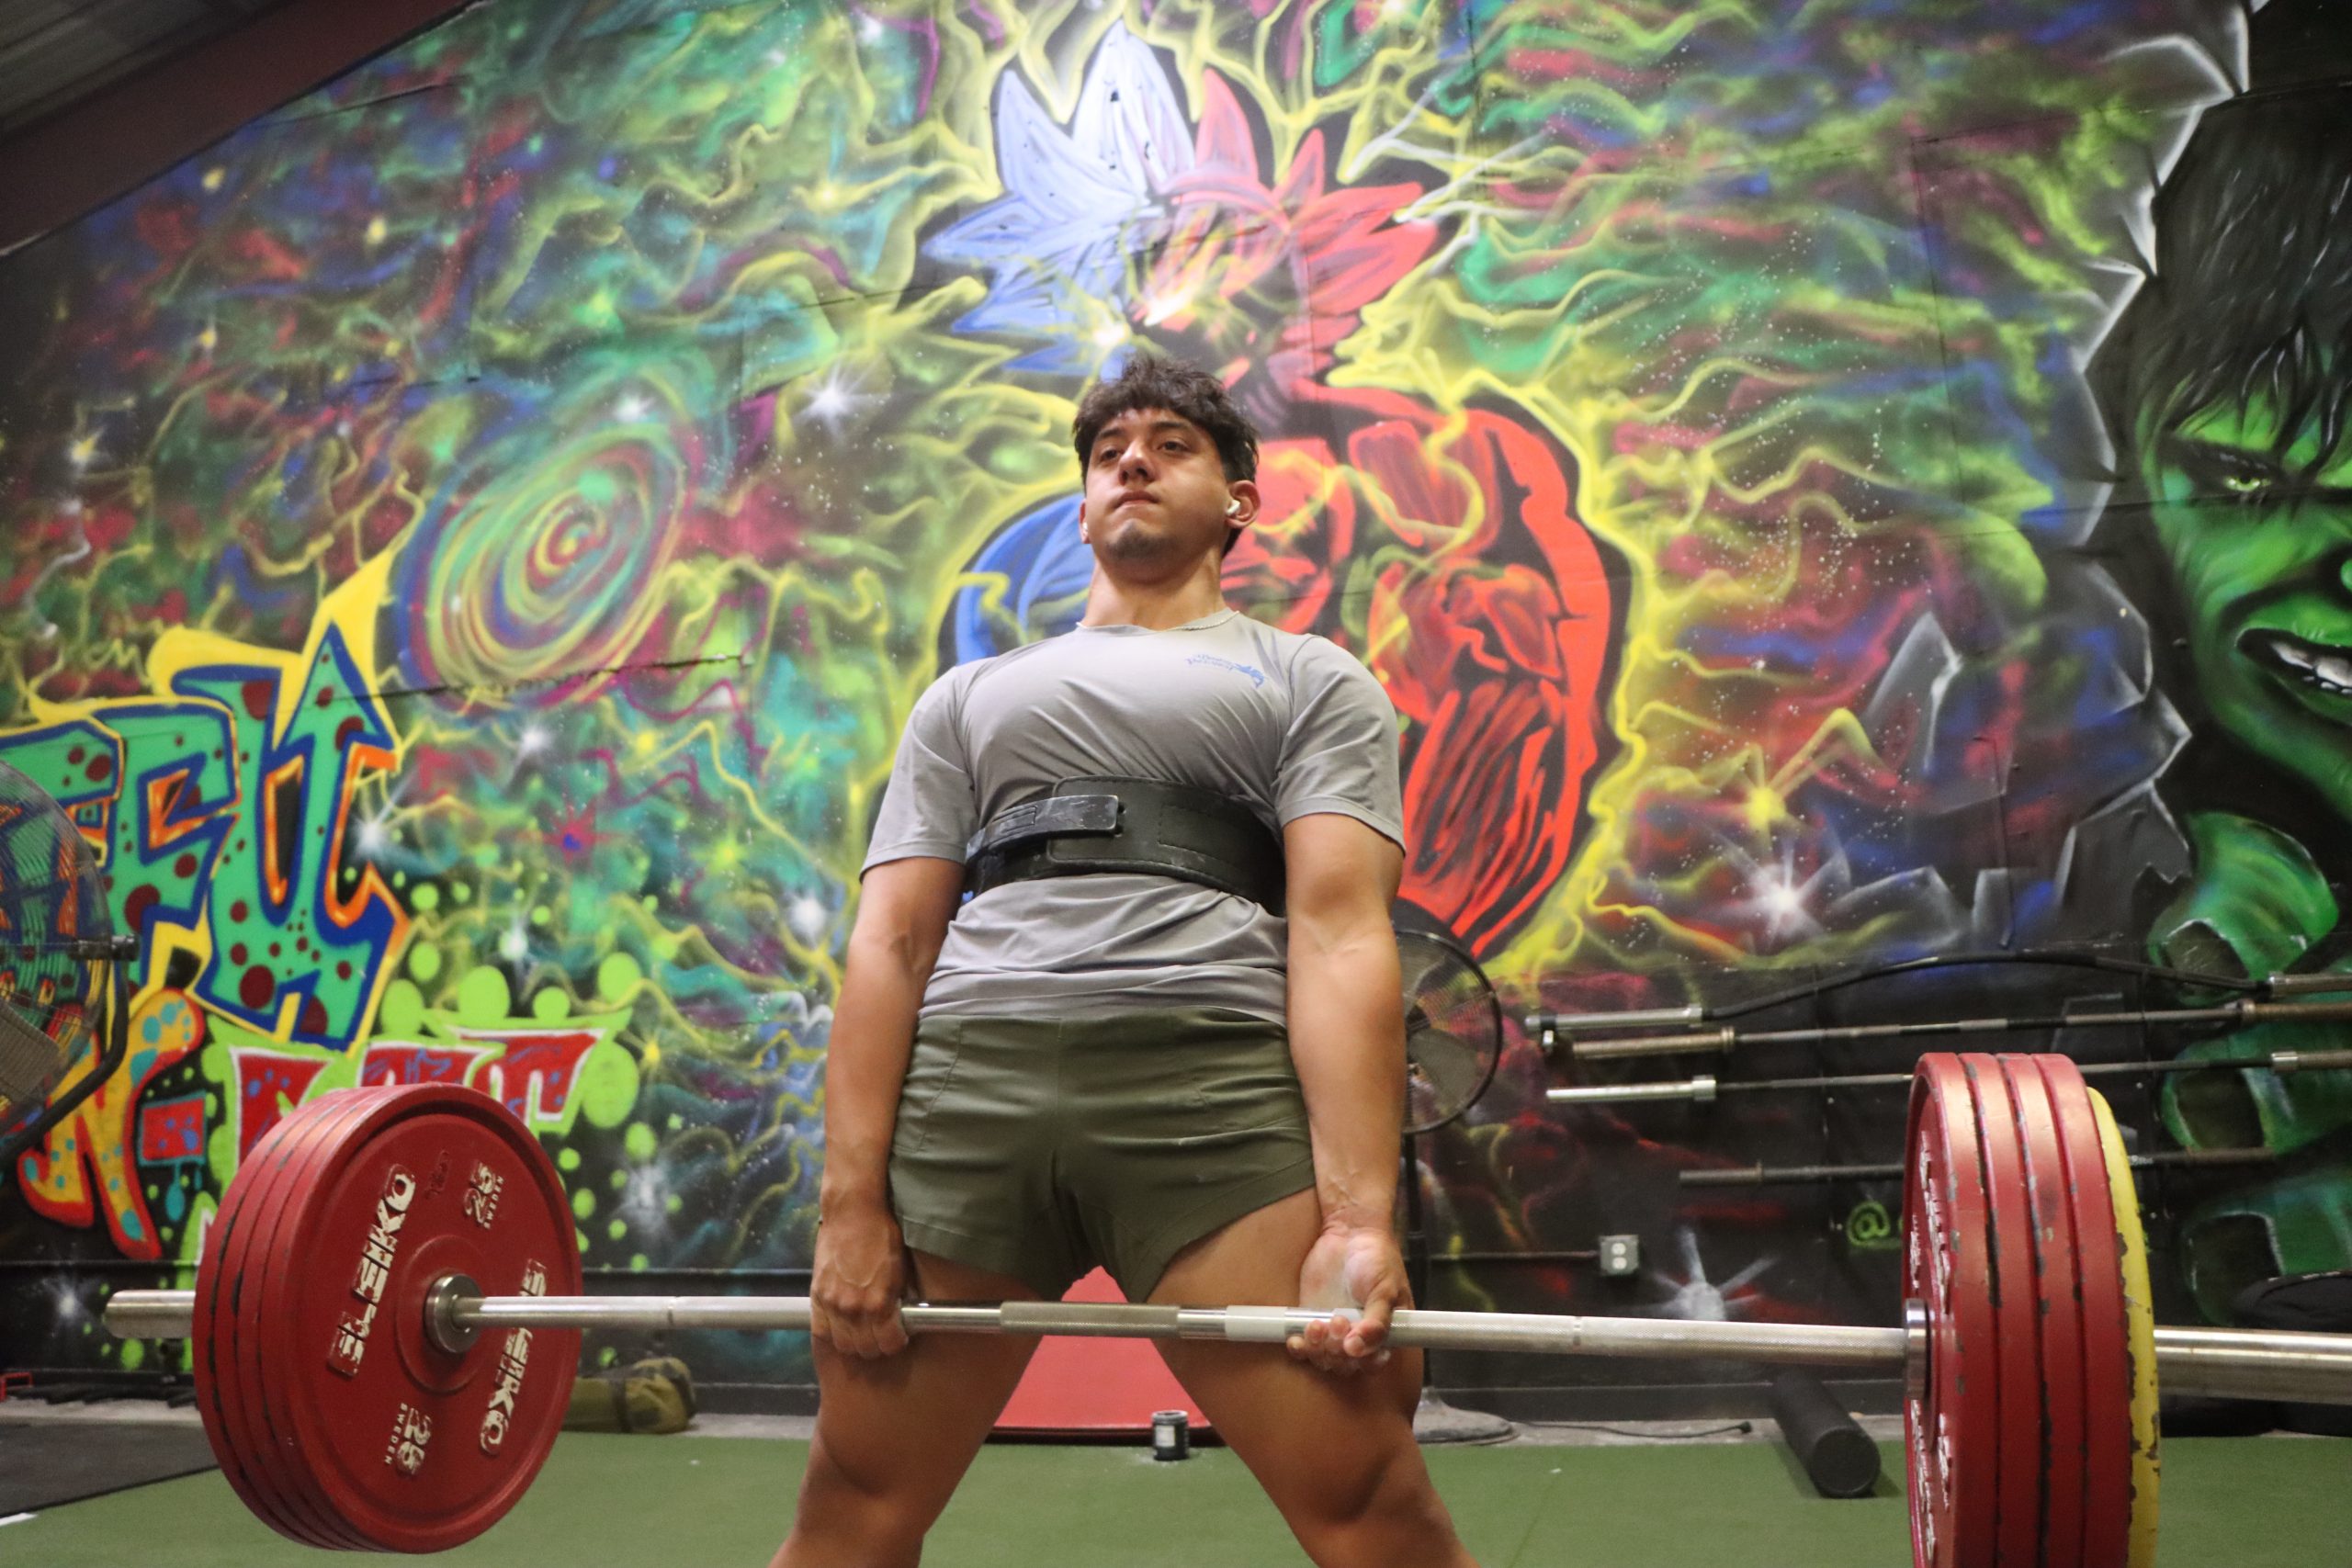 Student Spotlight: Finding focus and clarity through weightlifting